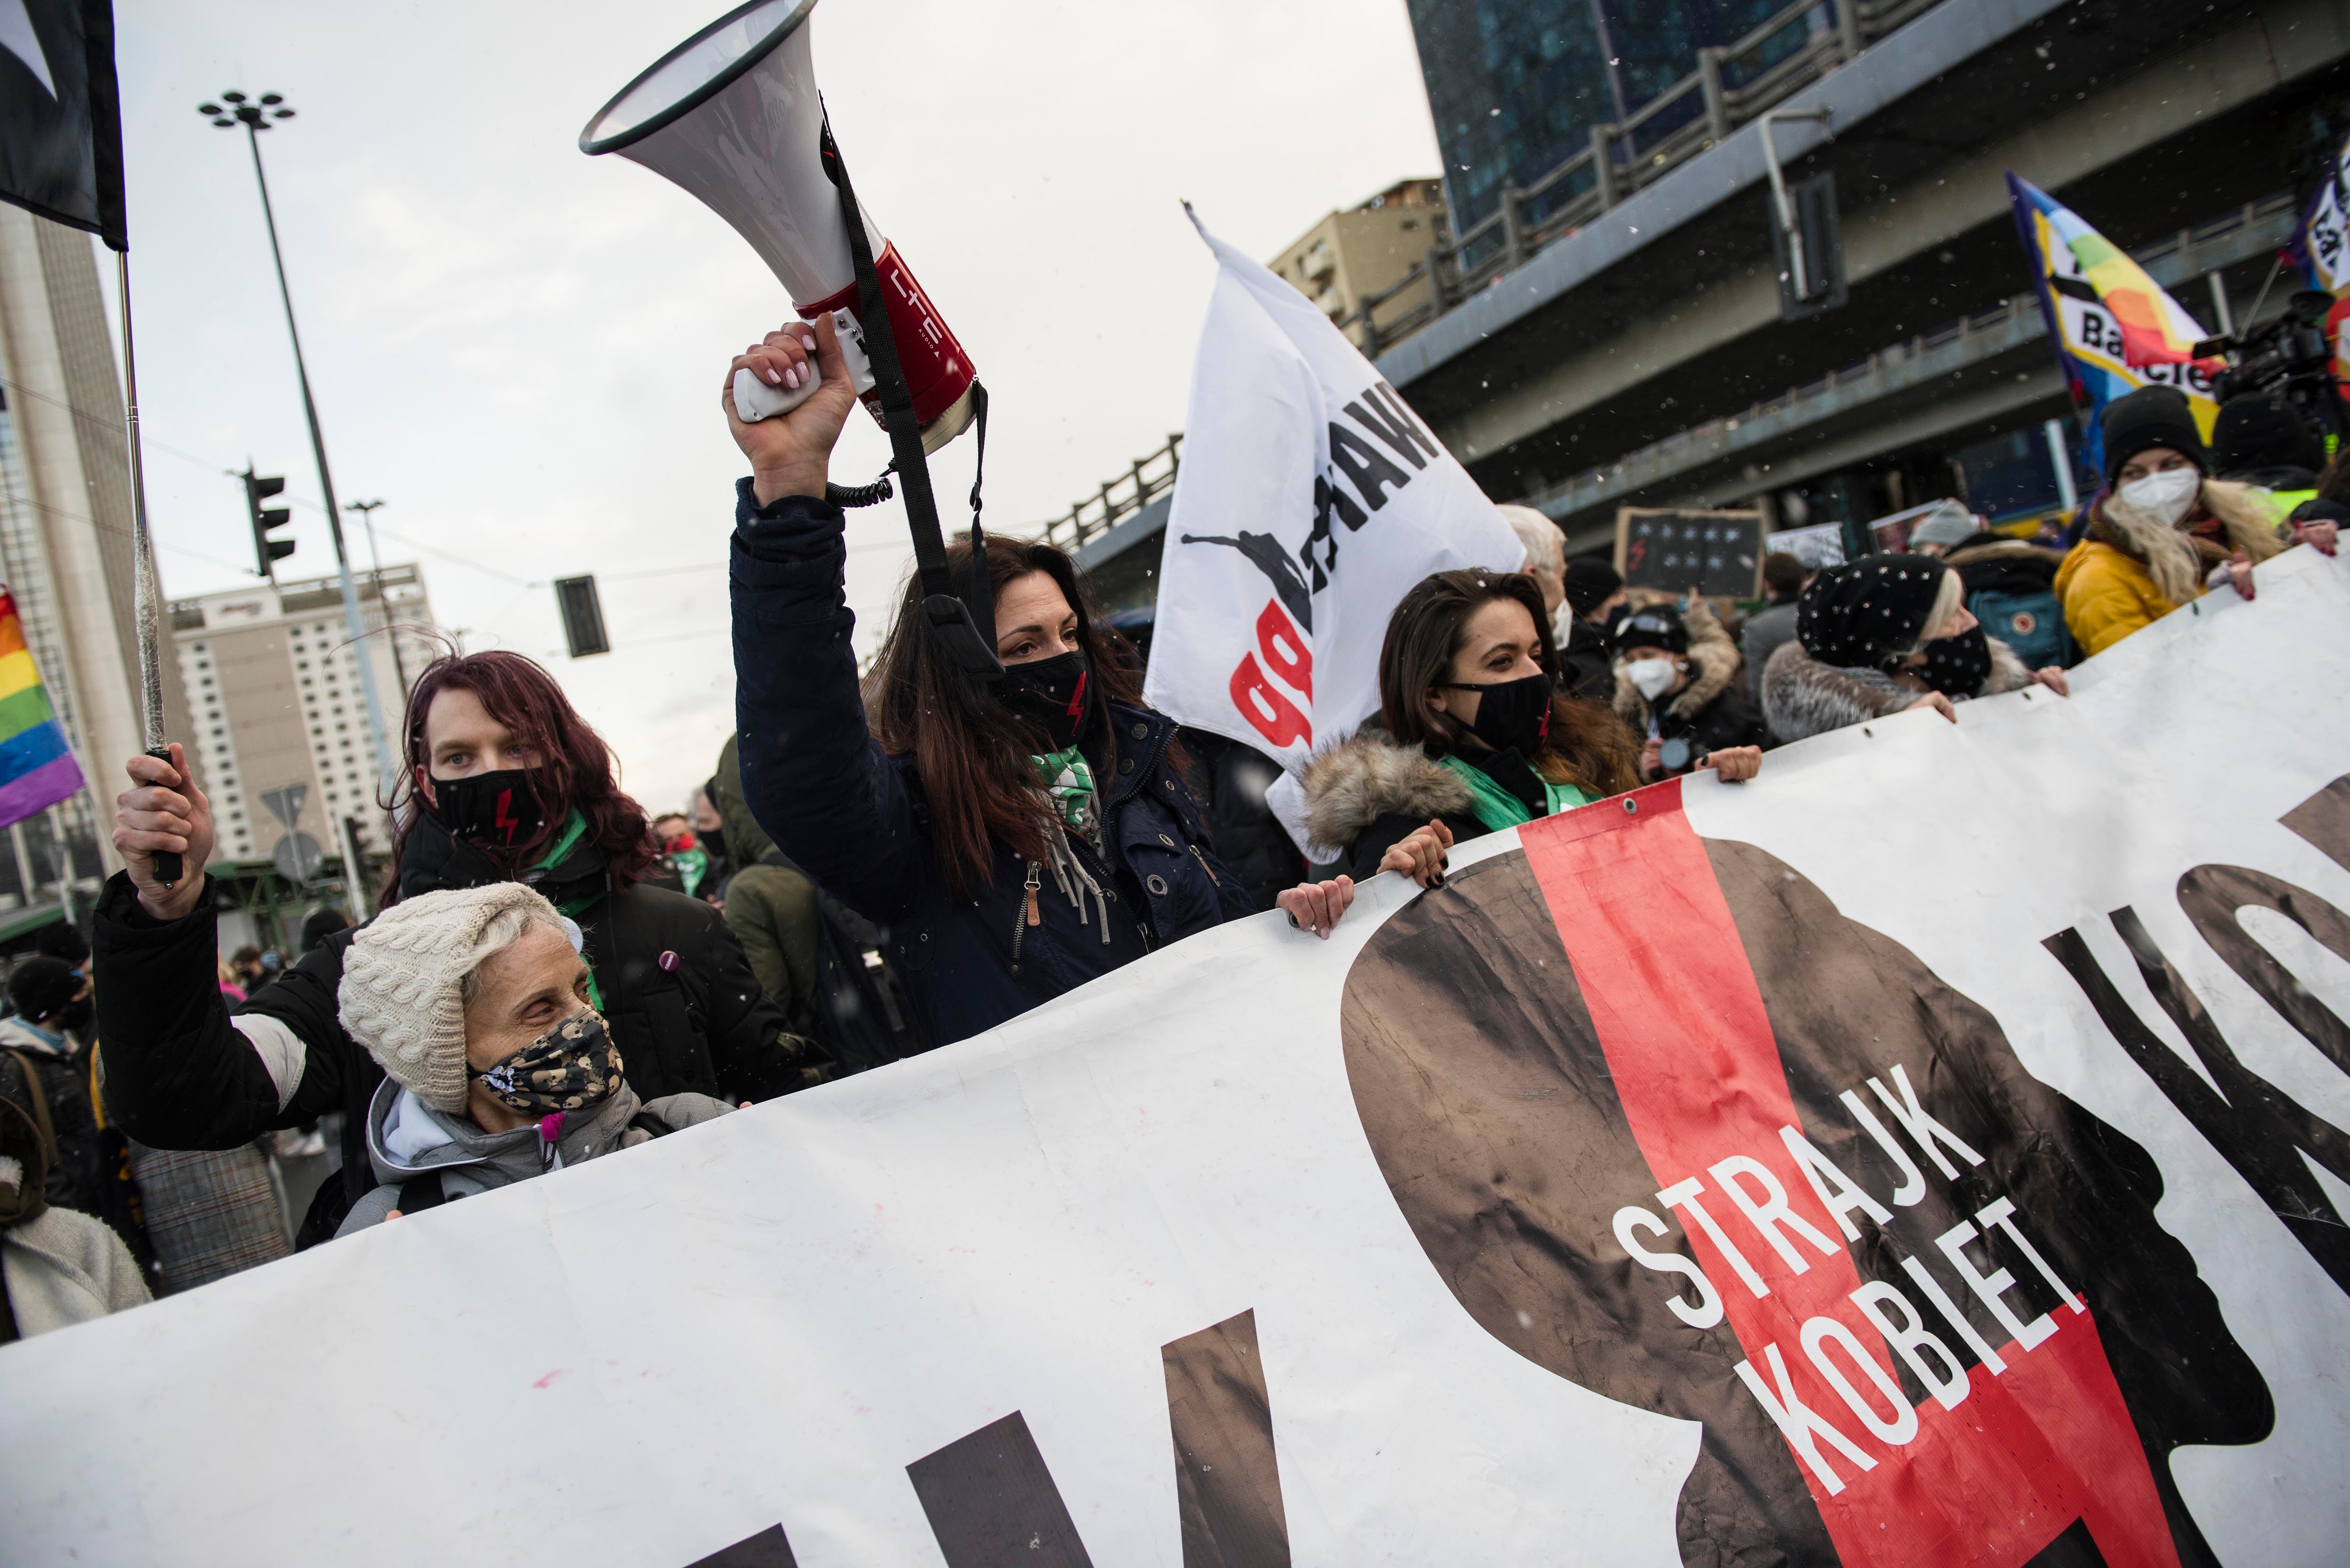 Protesters hold a banner of Strajk Kobiet (Women's Strike) during a protest in Warsaw on March 8,  International Women's Day, organized by the Women's Strike (Strajk Kobiet) against the ruling Law and Justice (PiS) party and the decision of the Constitutional Court.